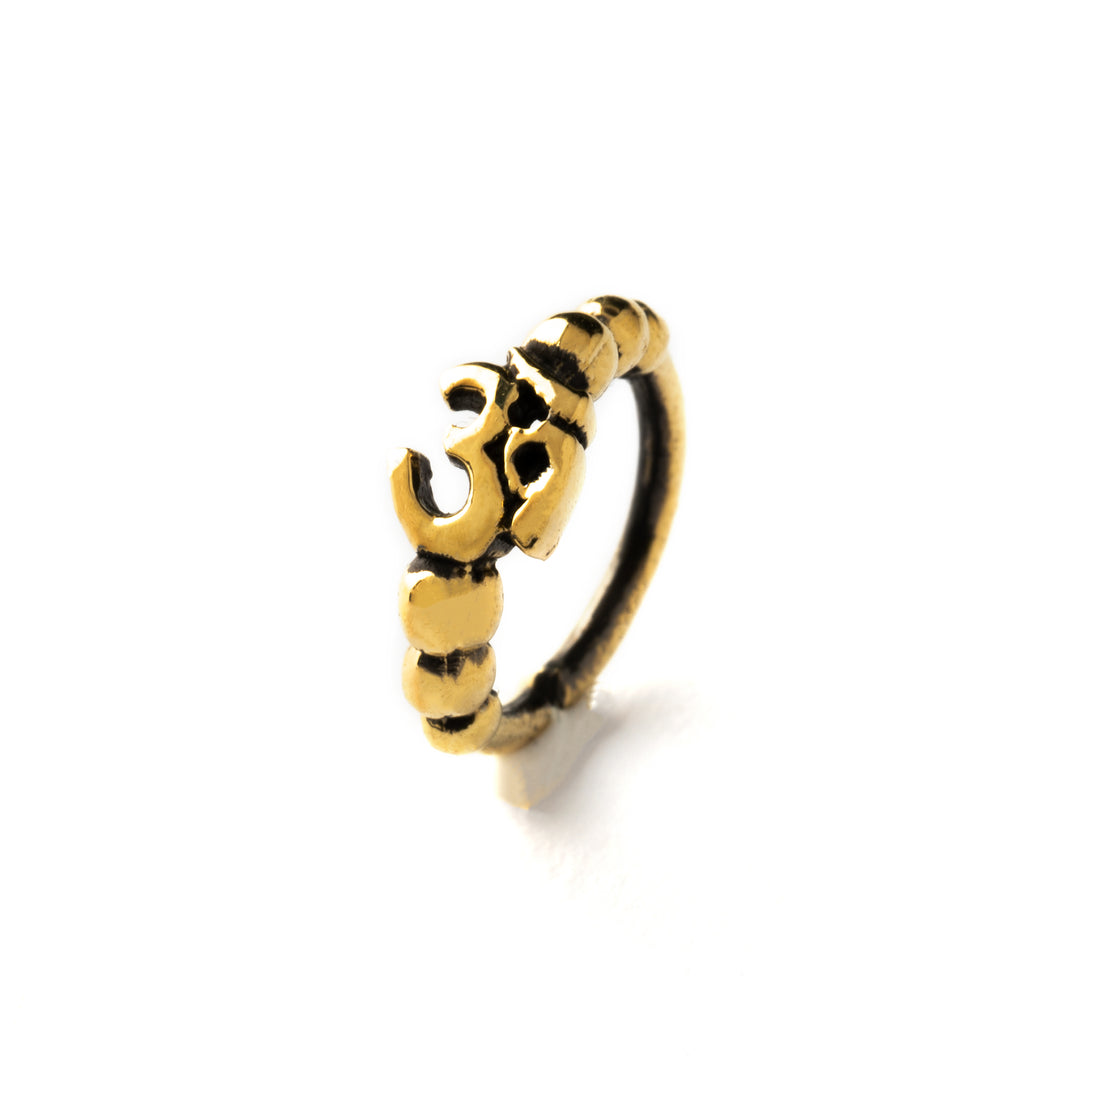 Om Golden brass nose ring frontal view